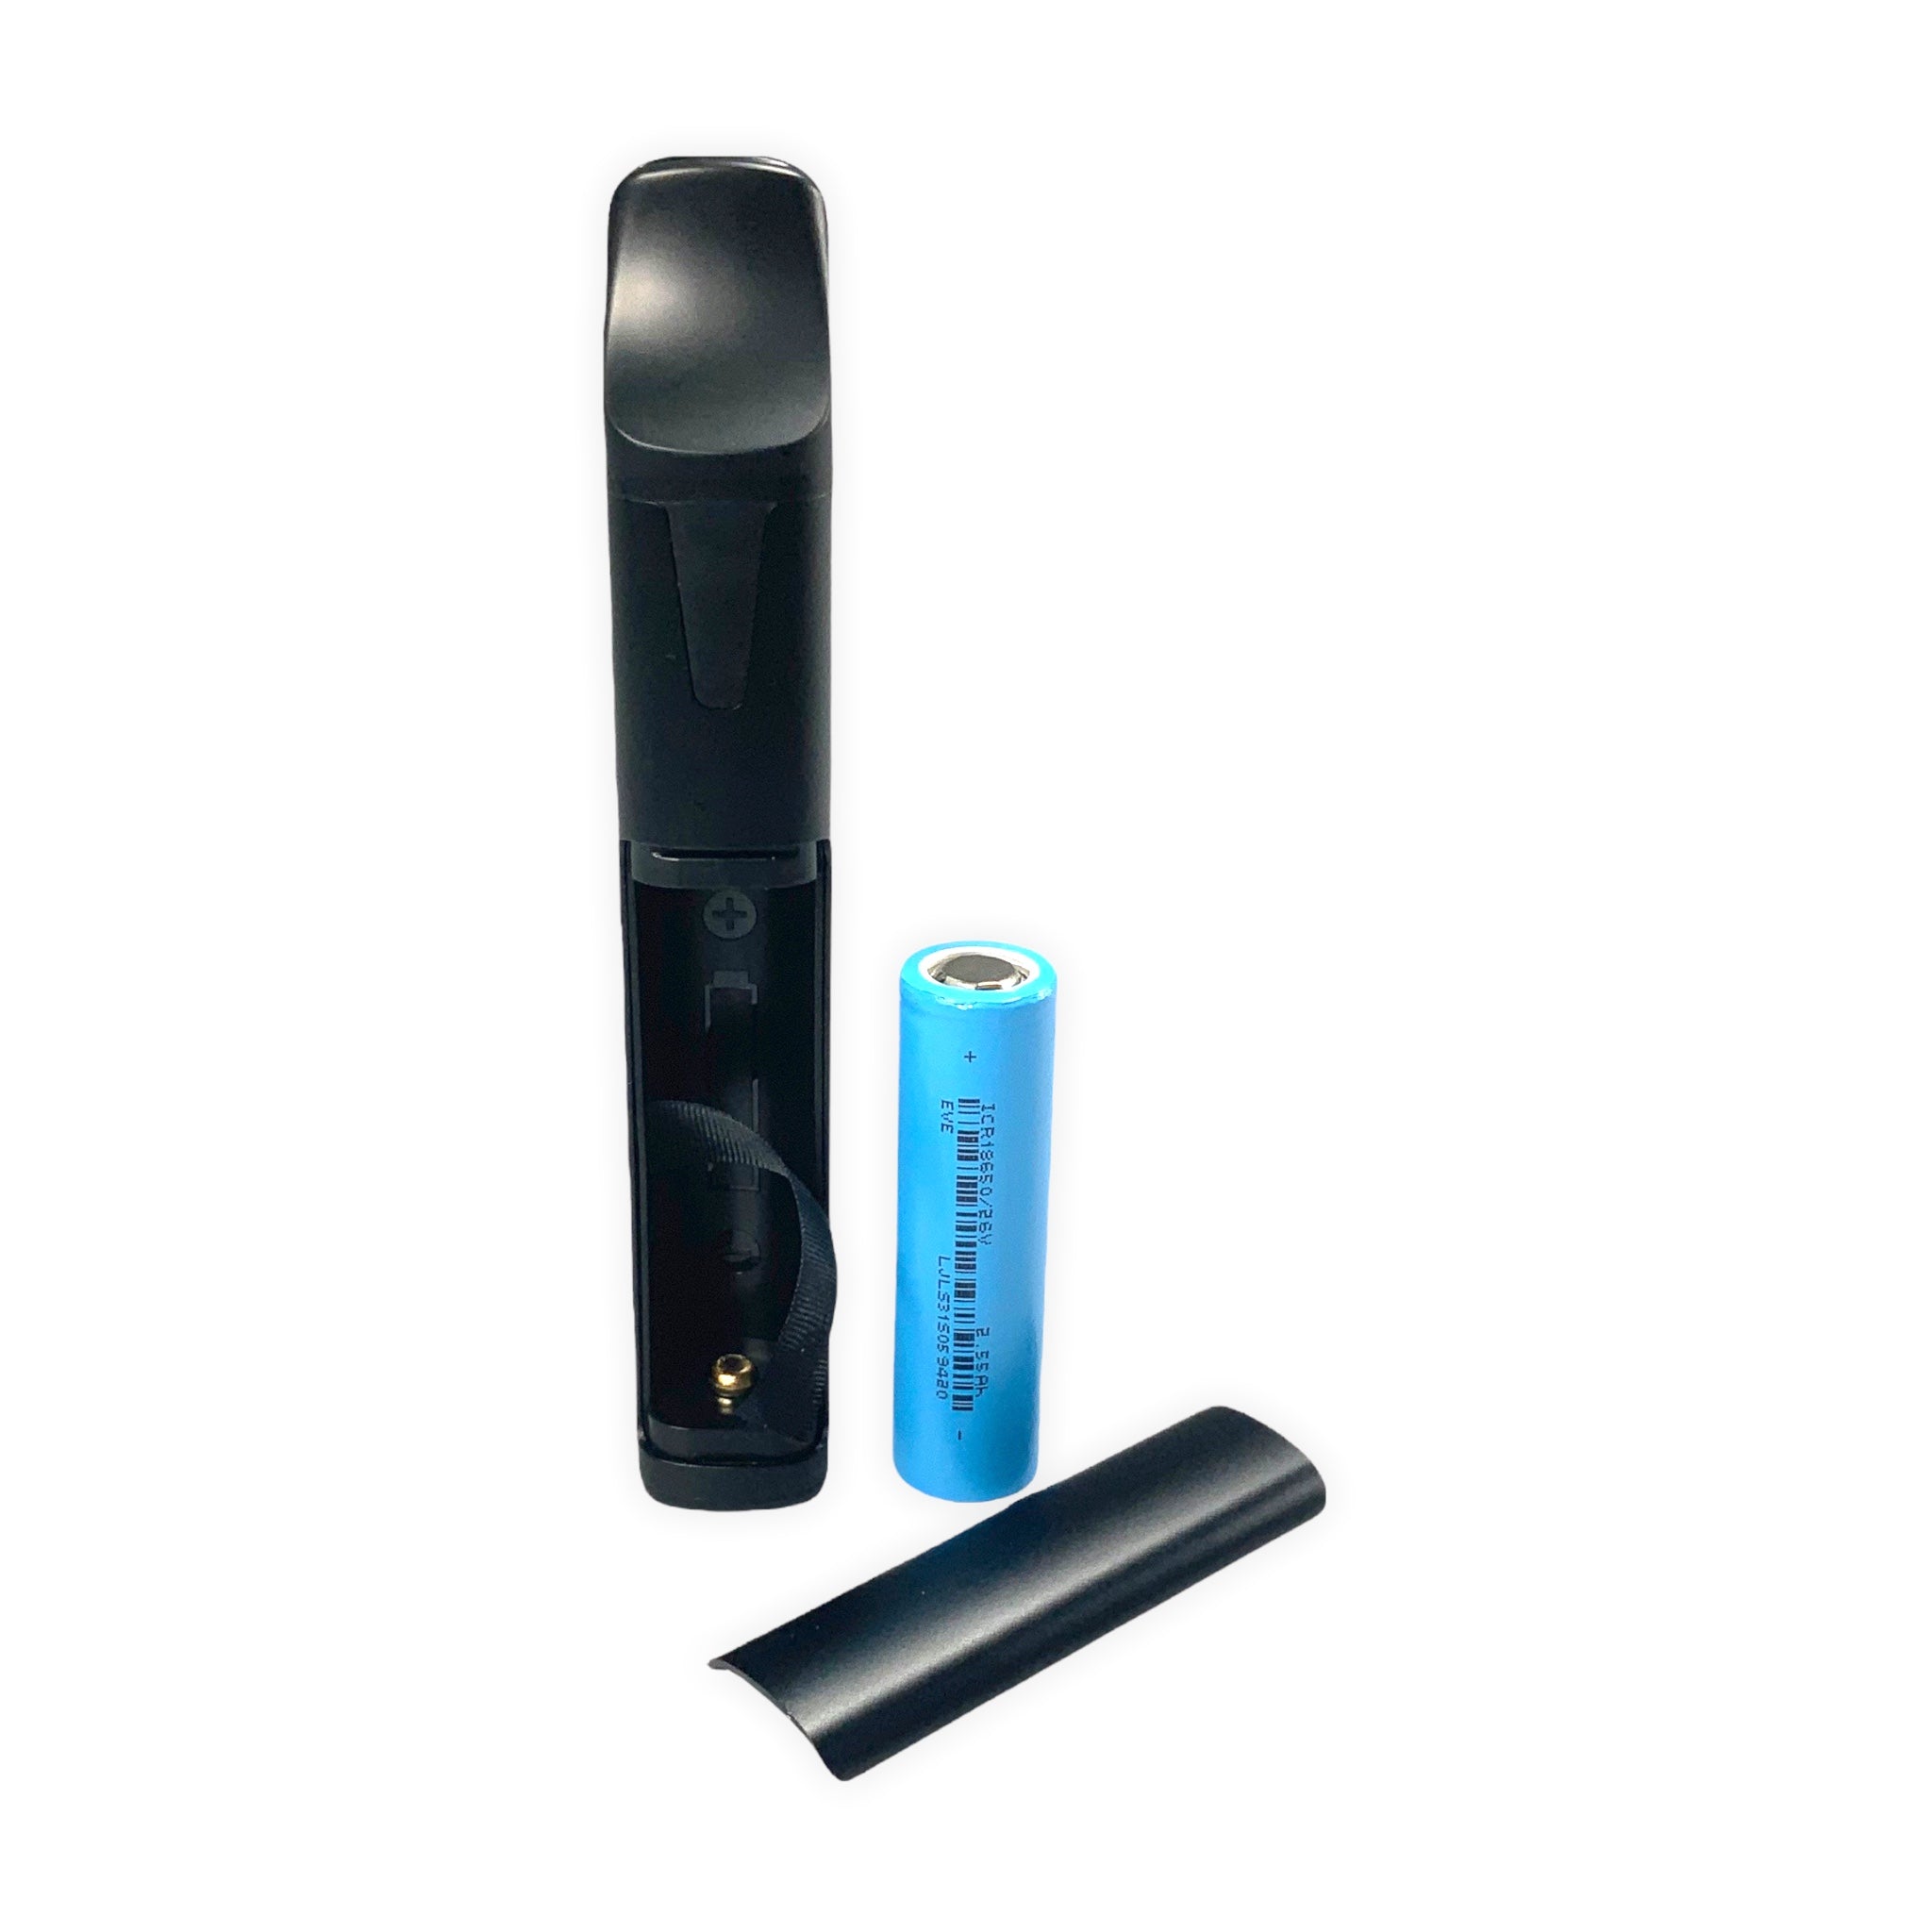 CuBoo Stick - on demand vaporizer - NEW in different colors!